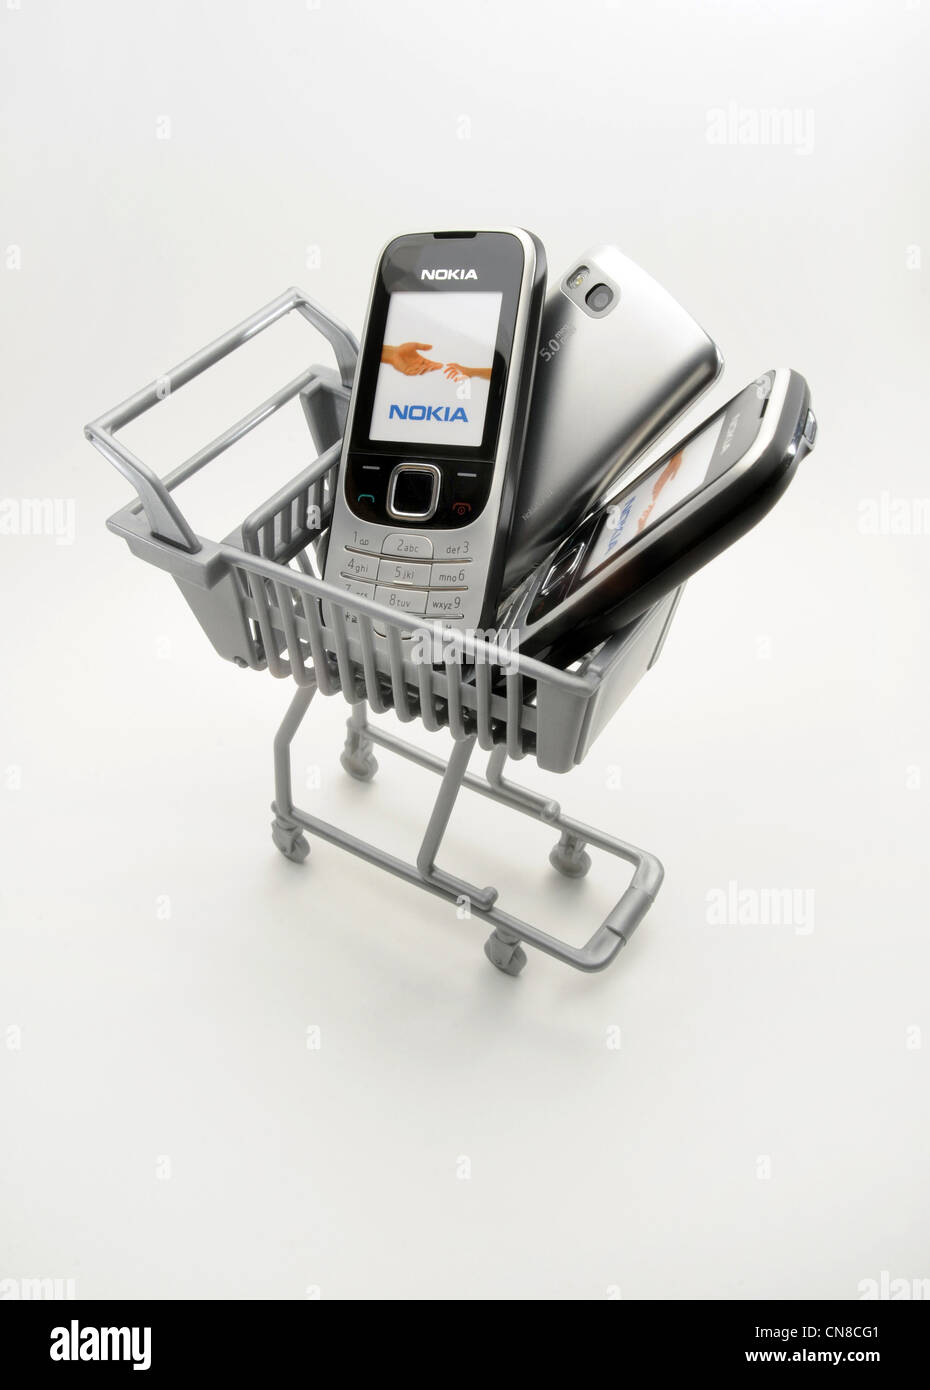 MOBILE PHONES IN SUPERMARKET SHOPPING TROLLEY RE SALES SELLING BUYERS BUYING CHOICE MAKERS PRICING PRICES PROVIDERS COSTS ETC UK Stock Photo